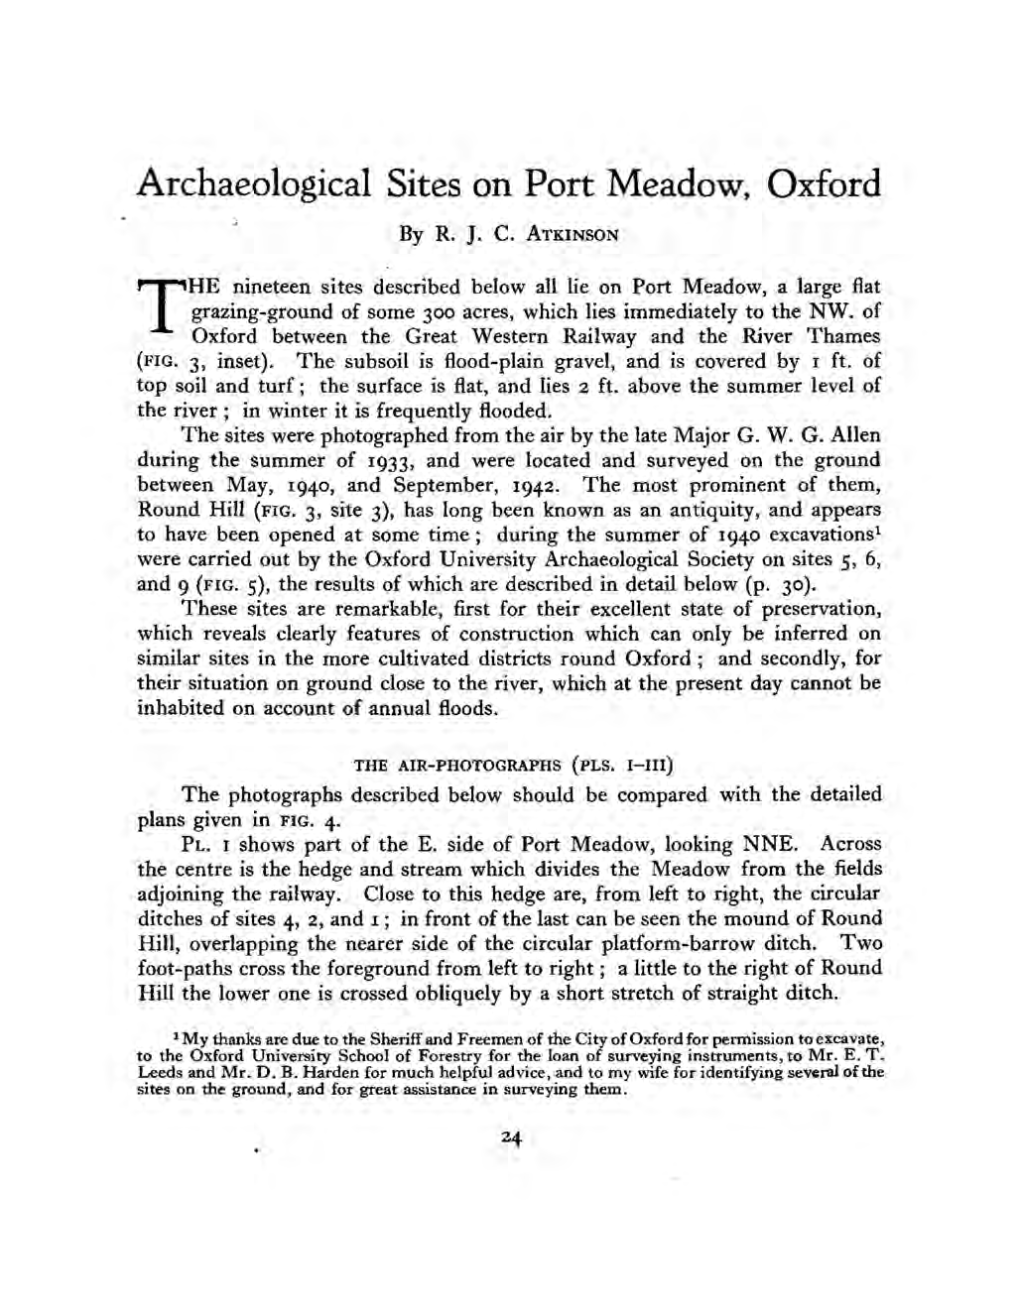 Archaeological Sites on Port Meadow, Oxford